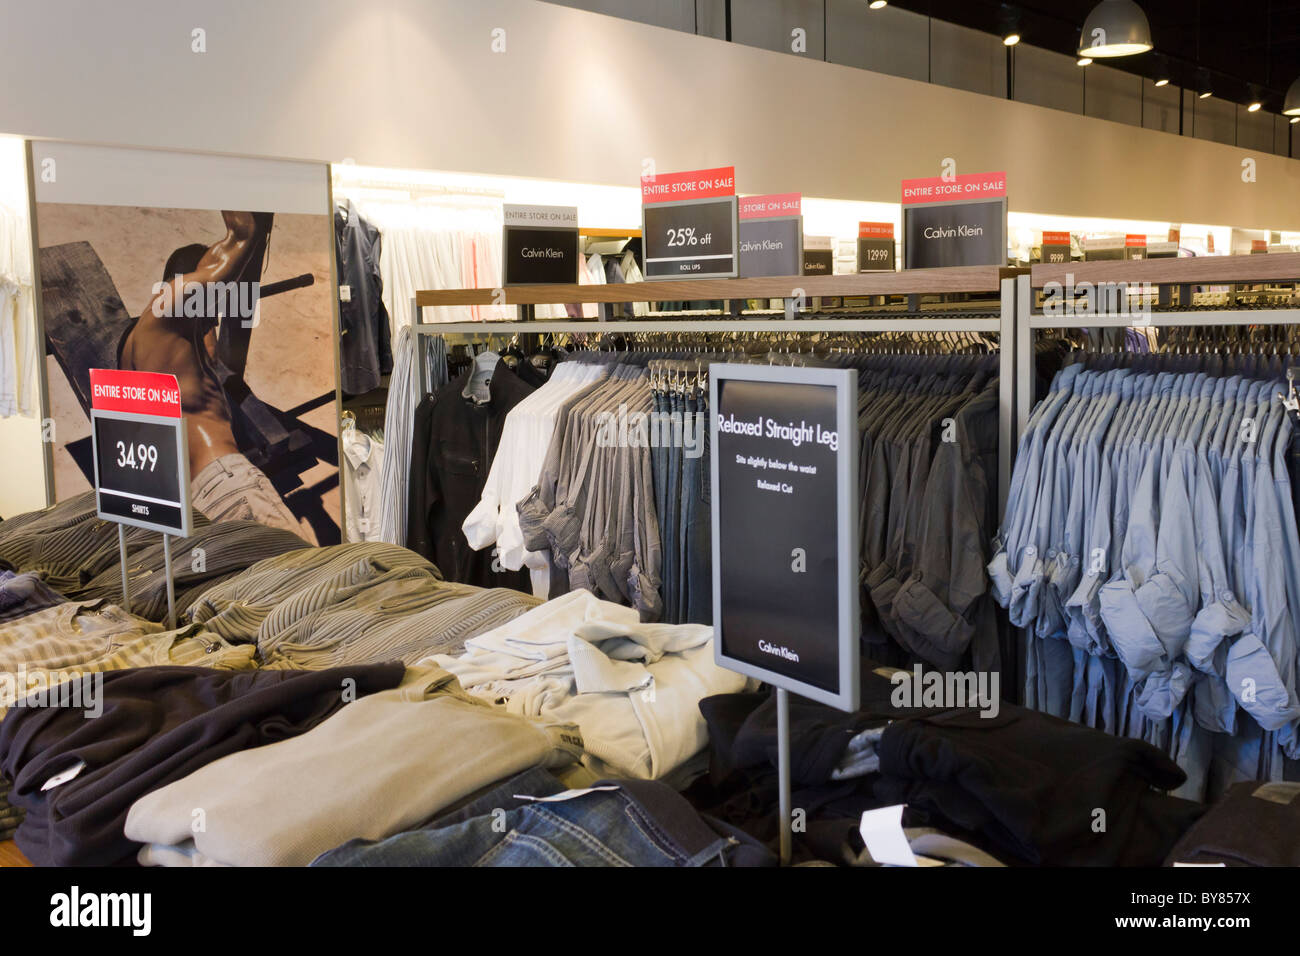 Calvin Klein Outlet Near Me on Sale, 60% OFF | www.chine-magazine.com